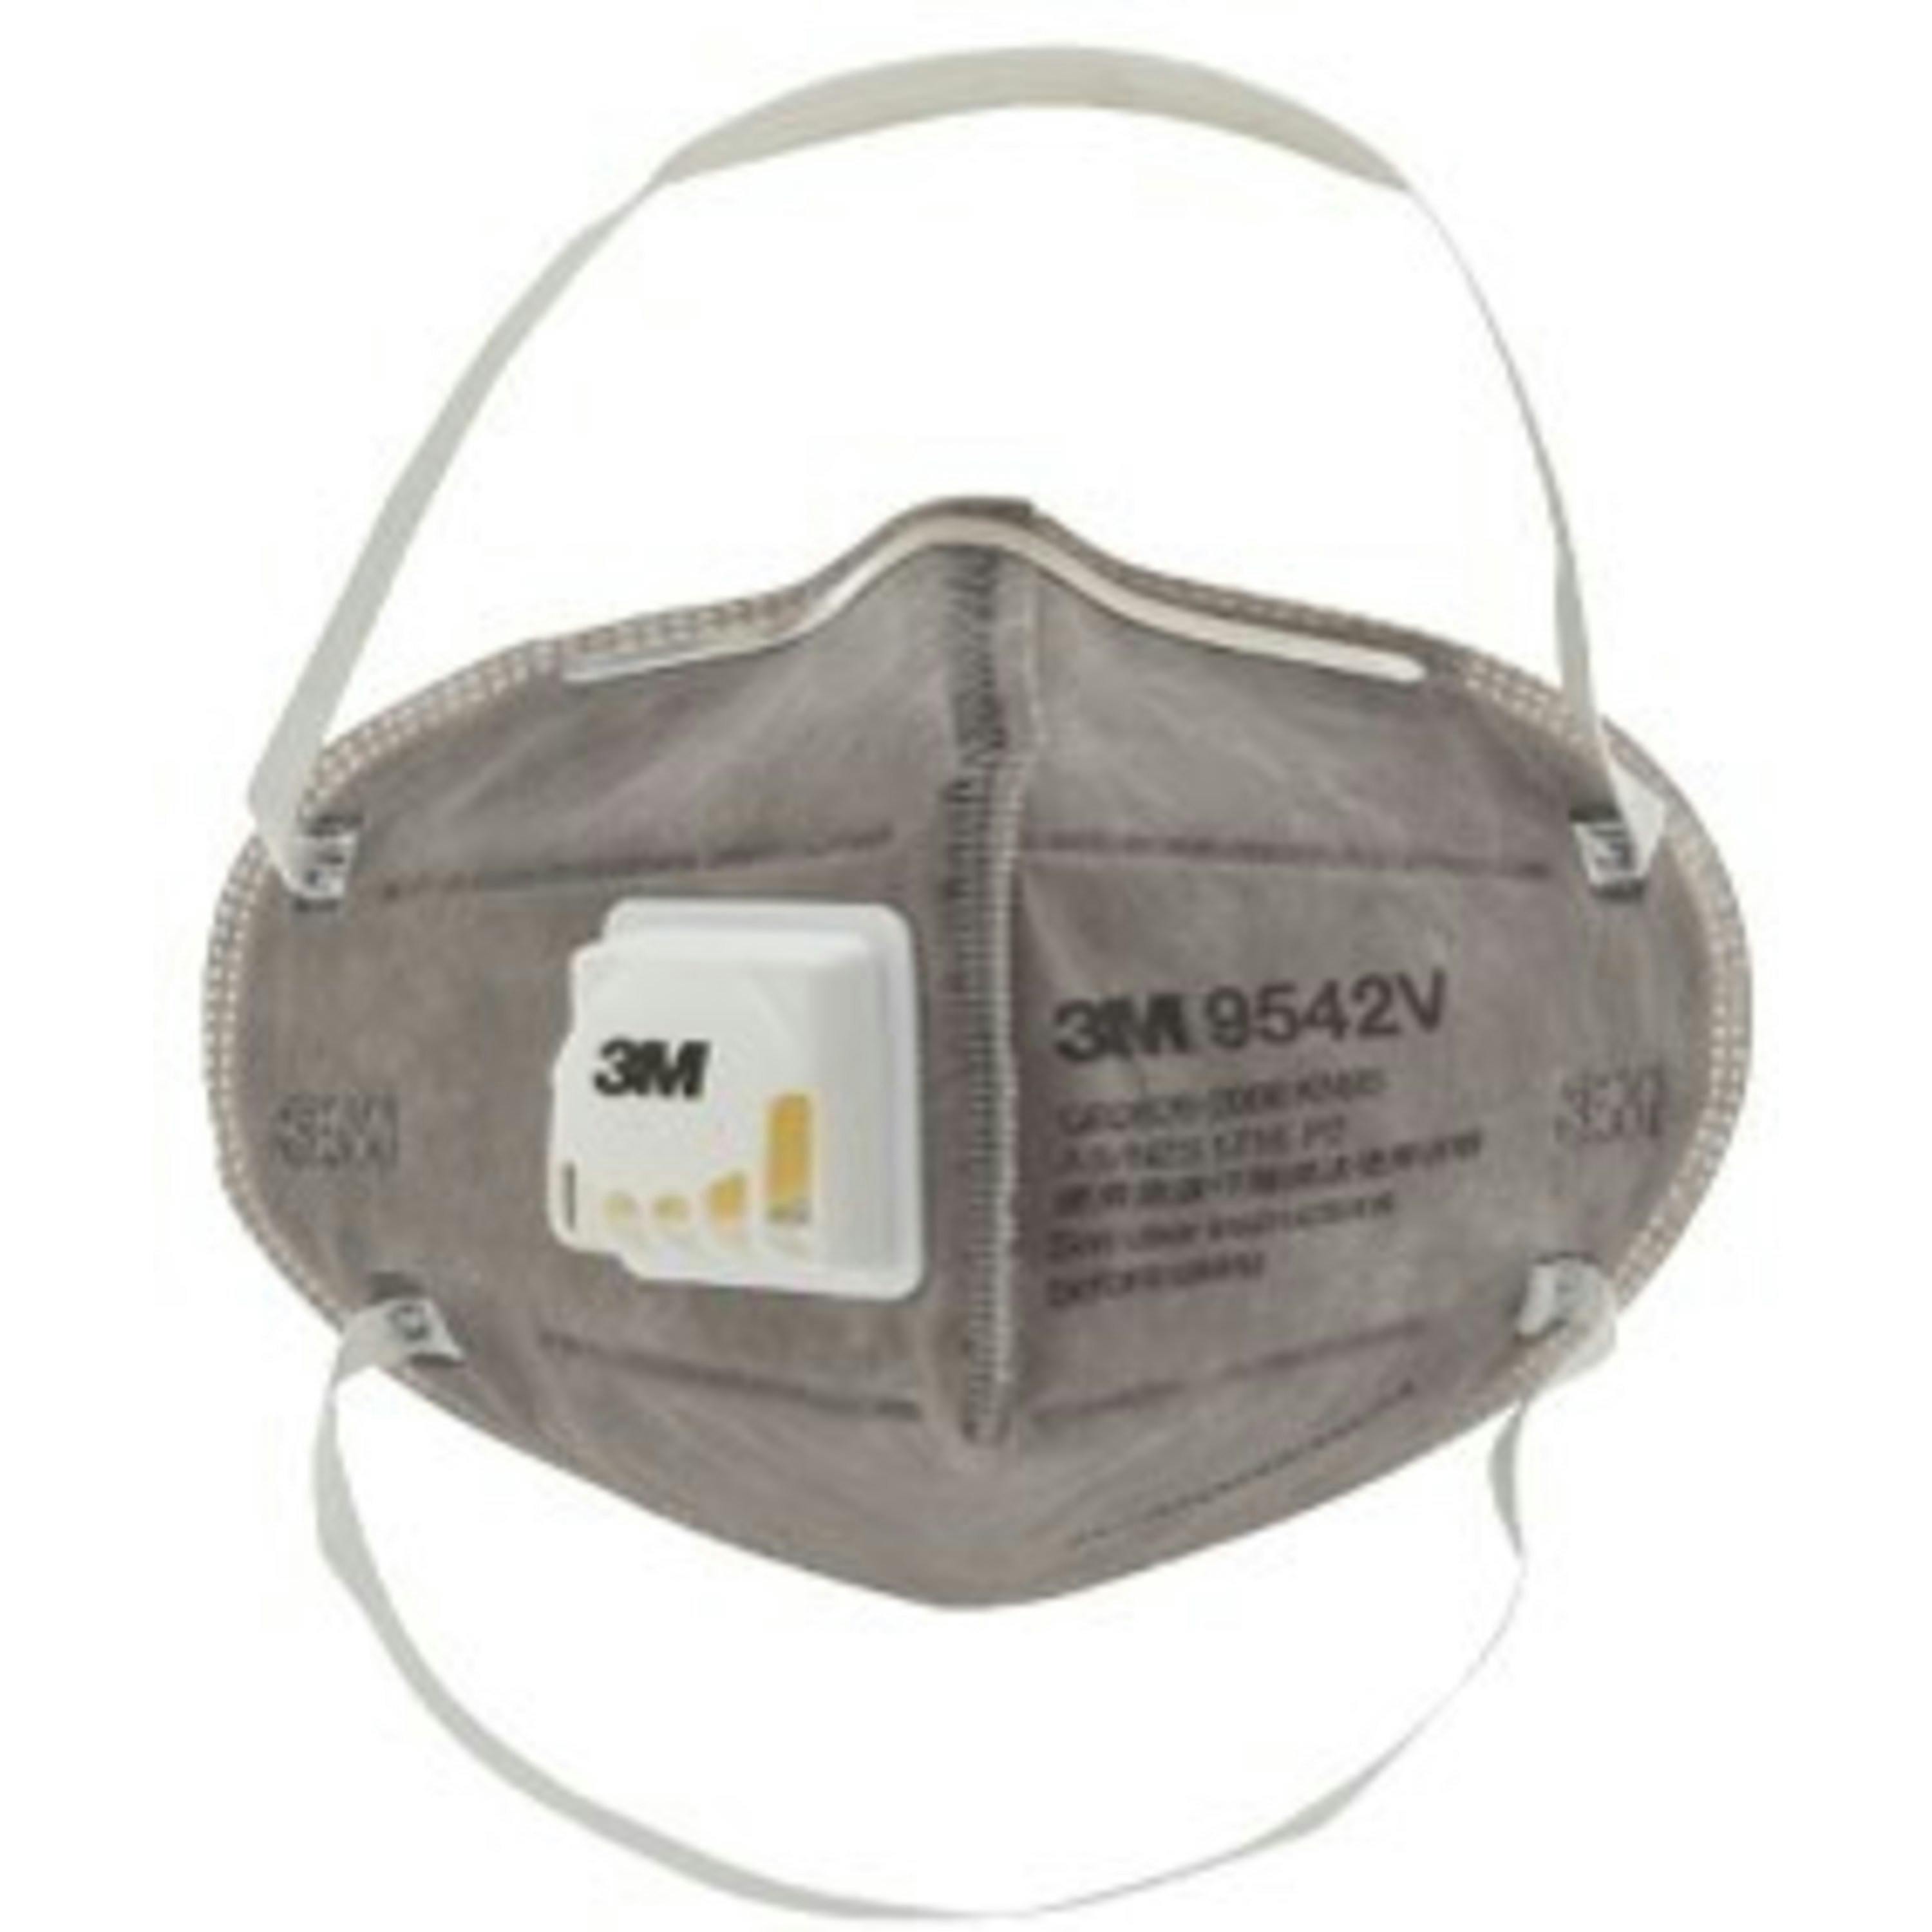 3M™ Flat Fold Particulate Respirator 9542V, P2, Valved, with Nuisance Level* Organic Vapour Relief, 20/Box, 10 Boxes/Case